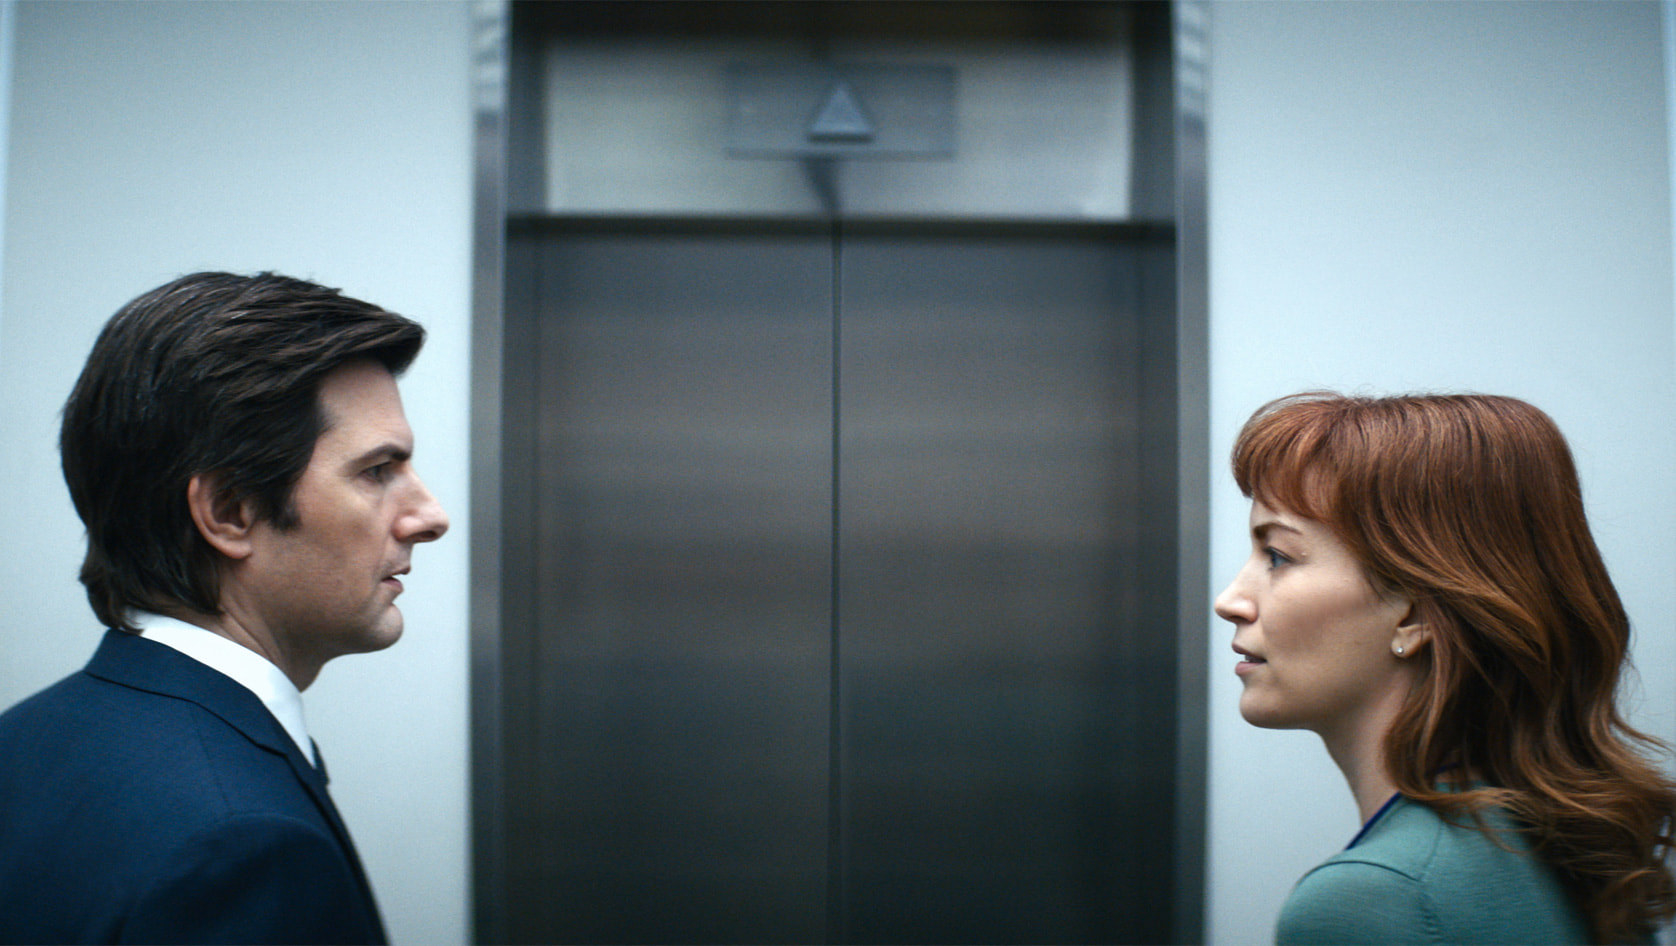 a man and a woman look at a each other in front of an elevator